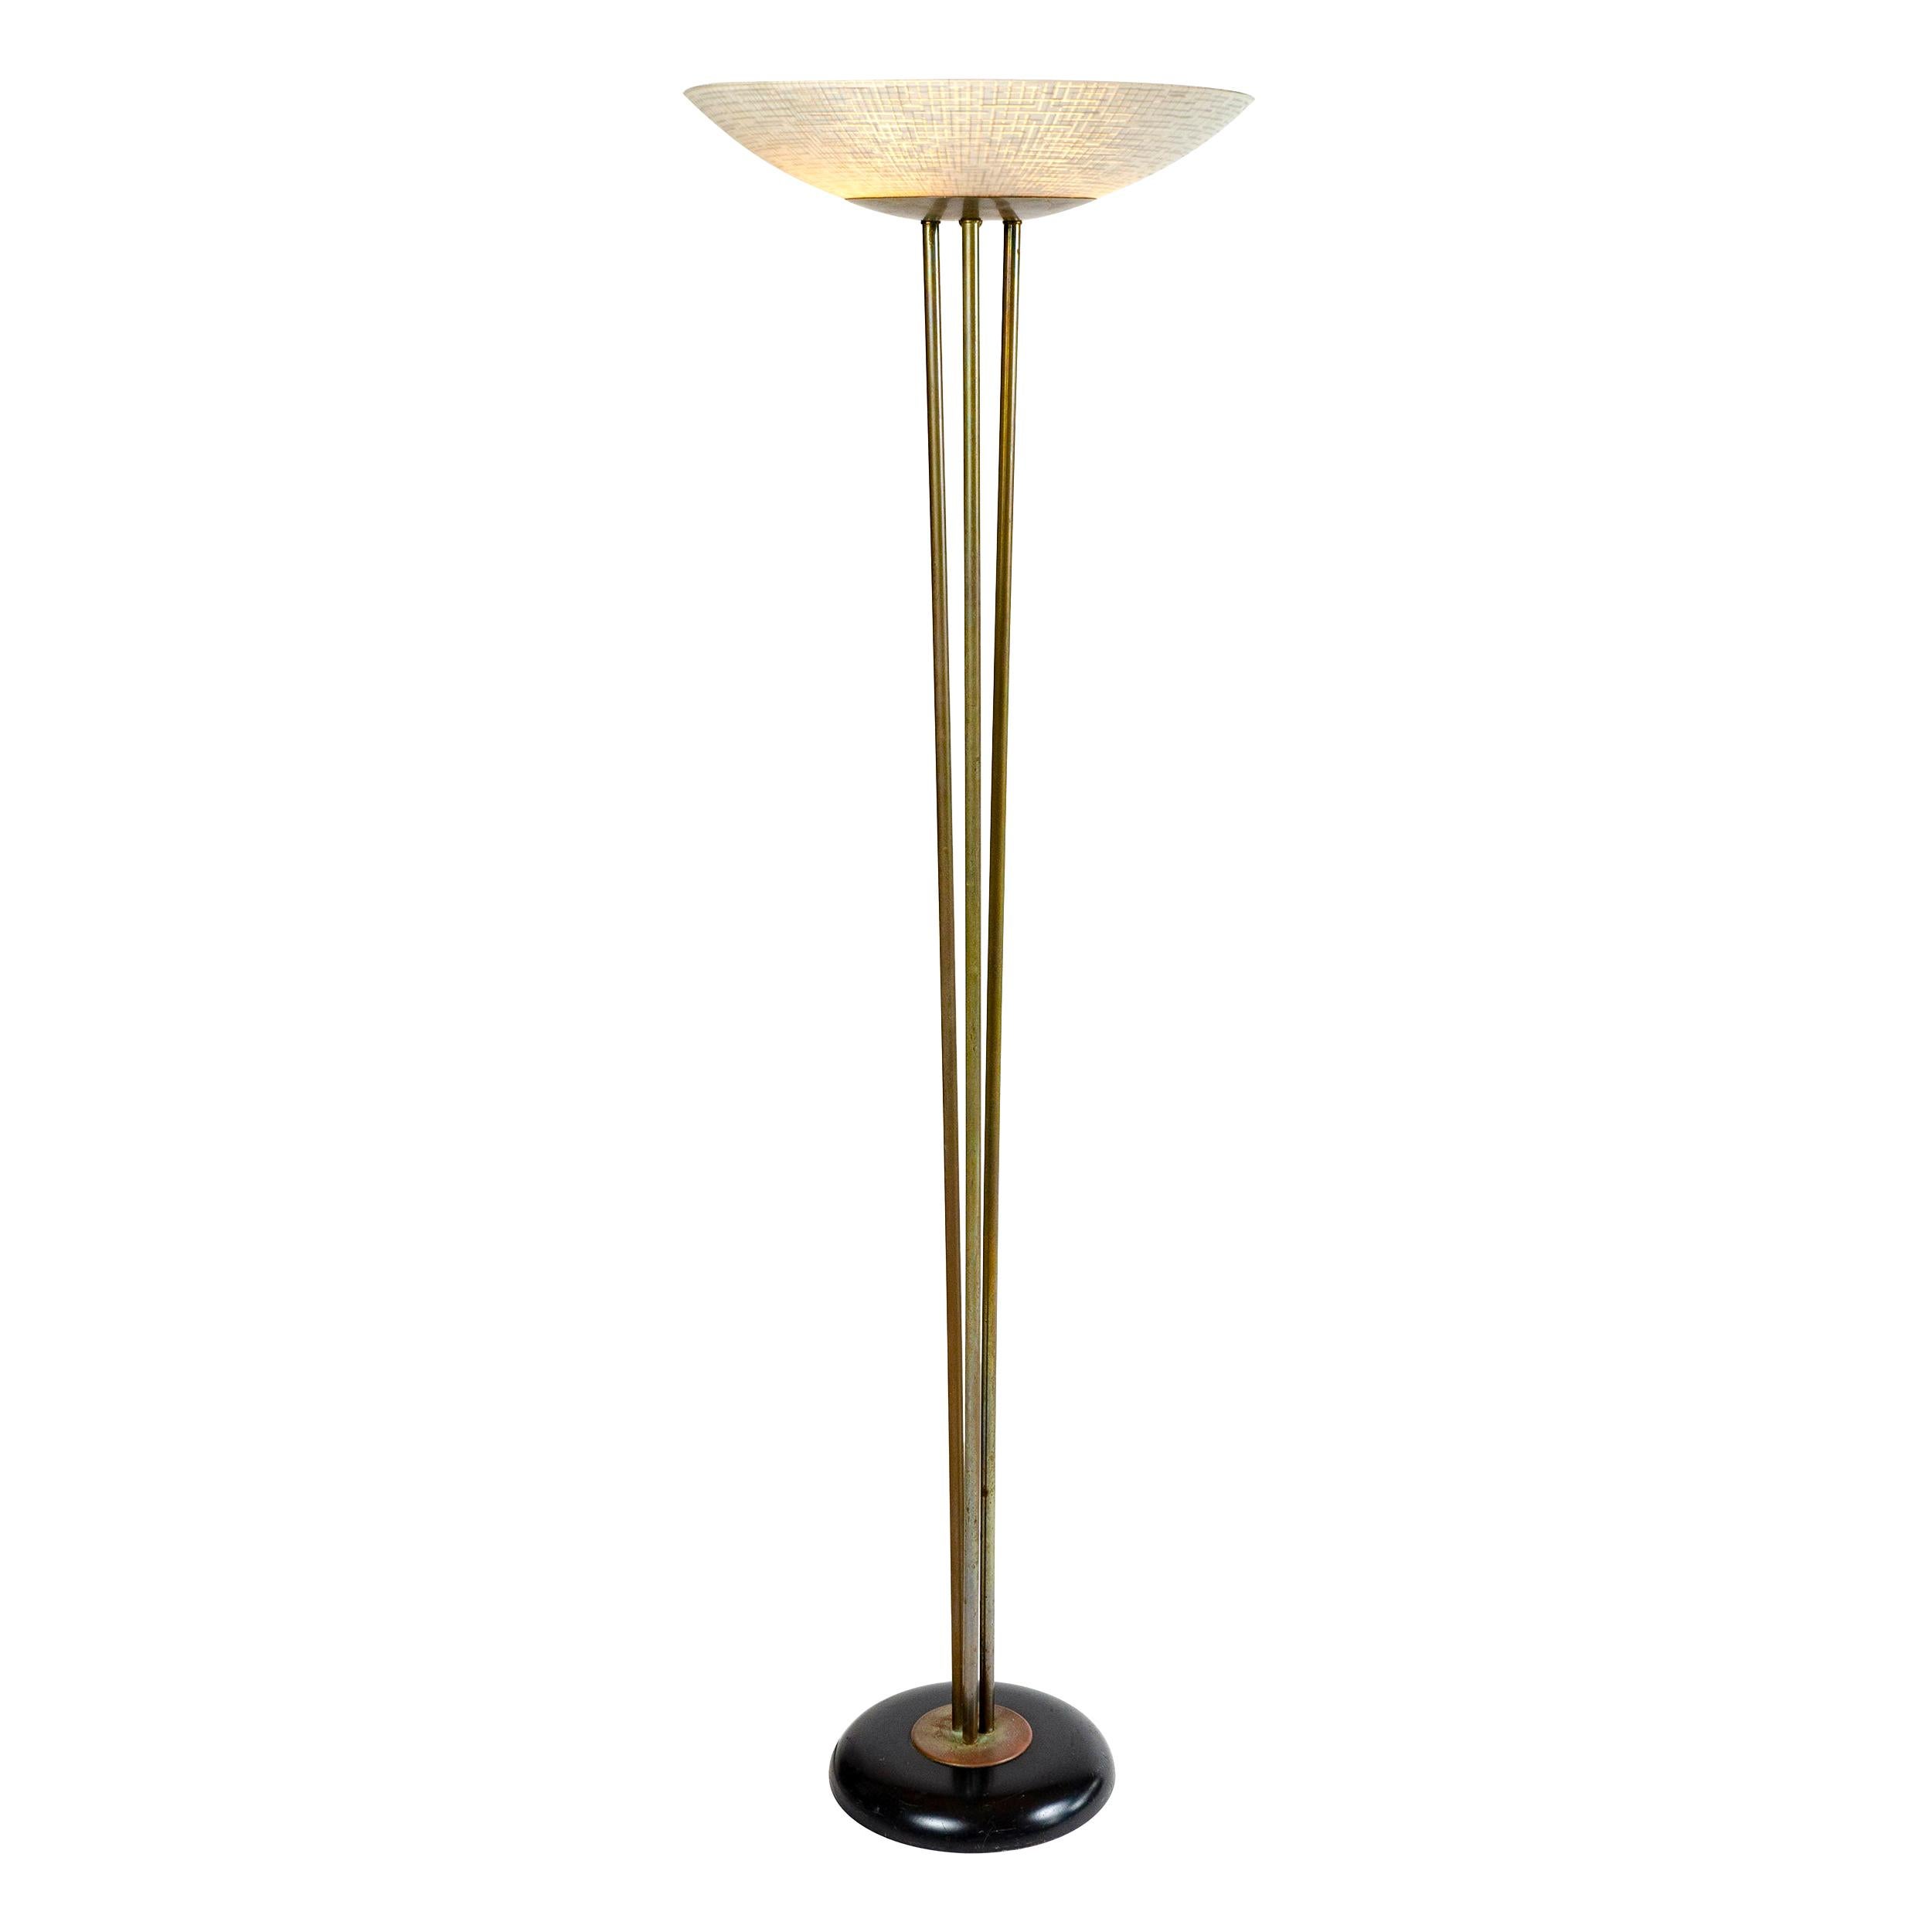 1950s Torchère Floor Lamp by Gerald Thurston for Lightolier